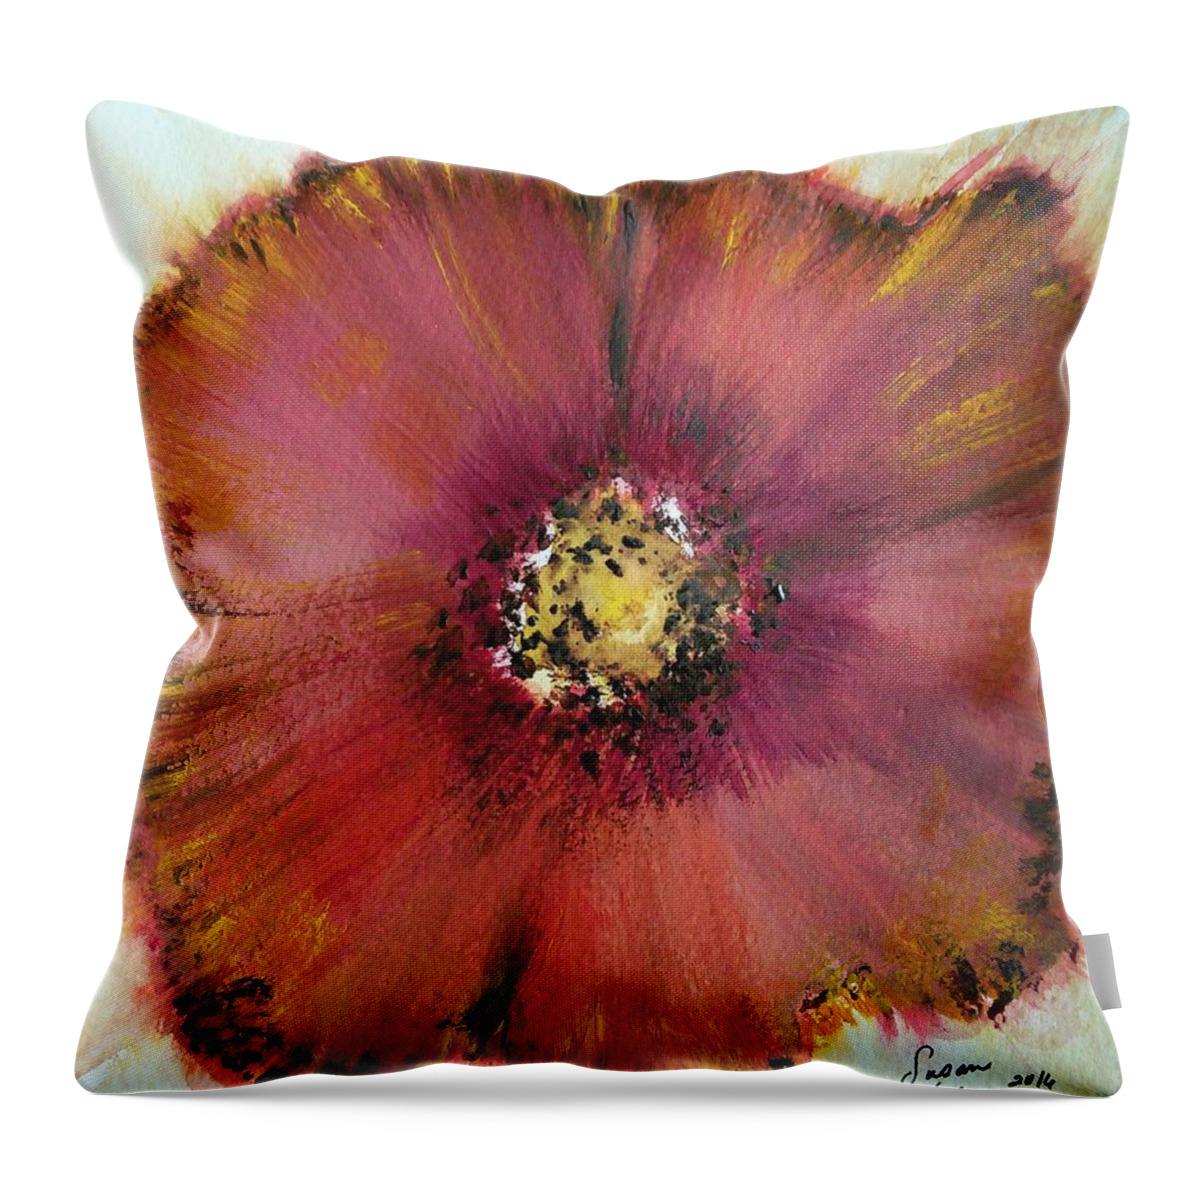 Big Flower Throw Pillow featuring the painting Big Red Flower by Susan Nielsen